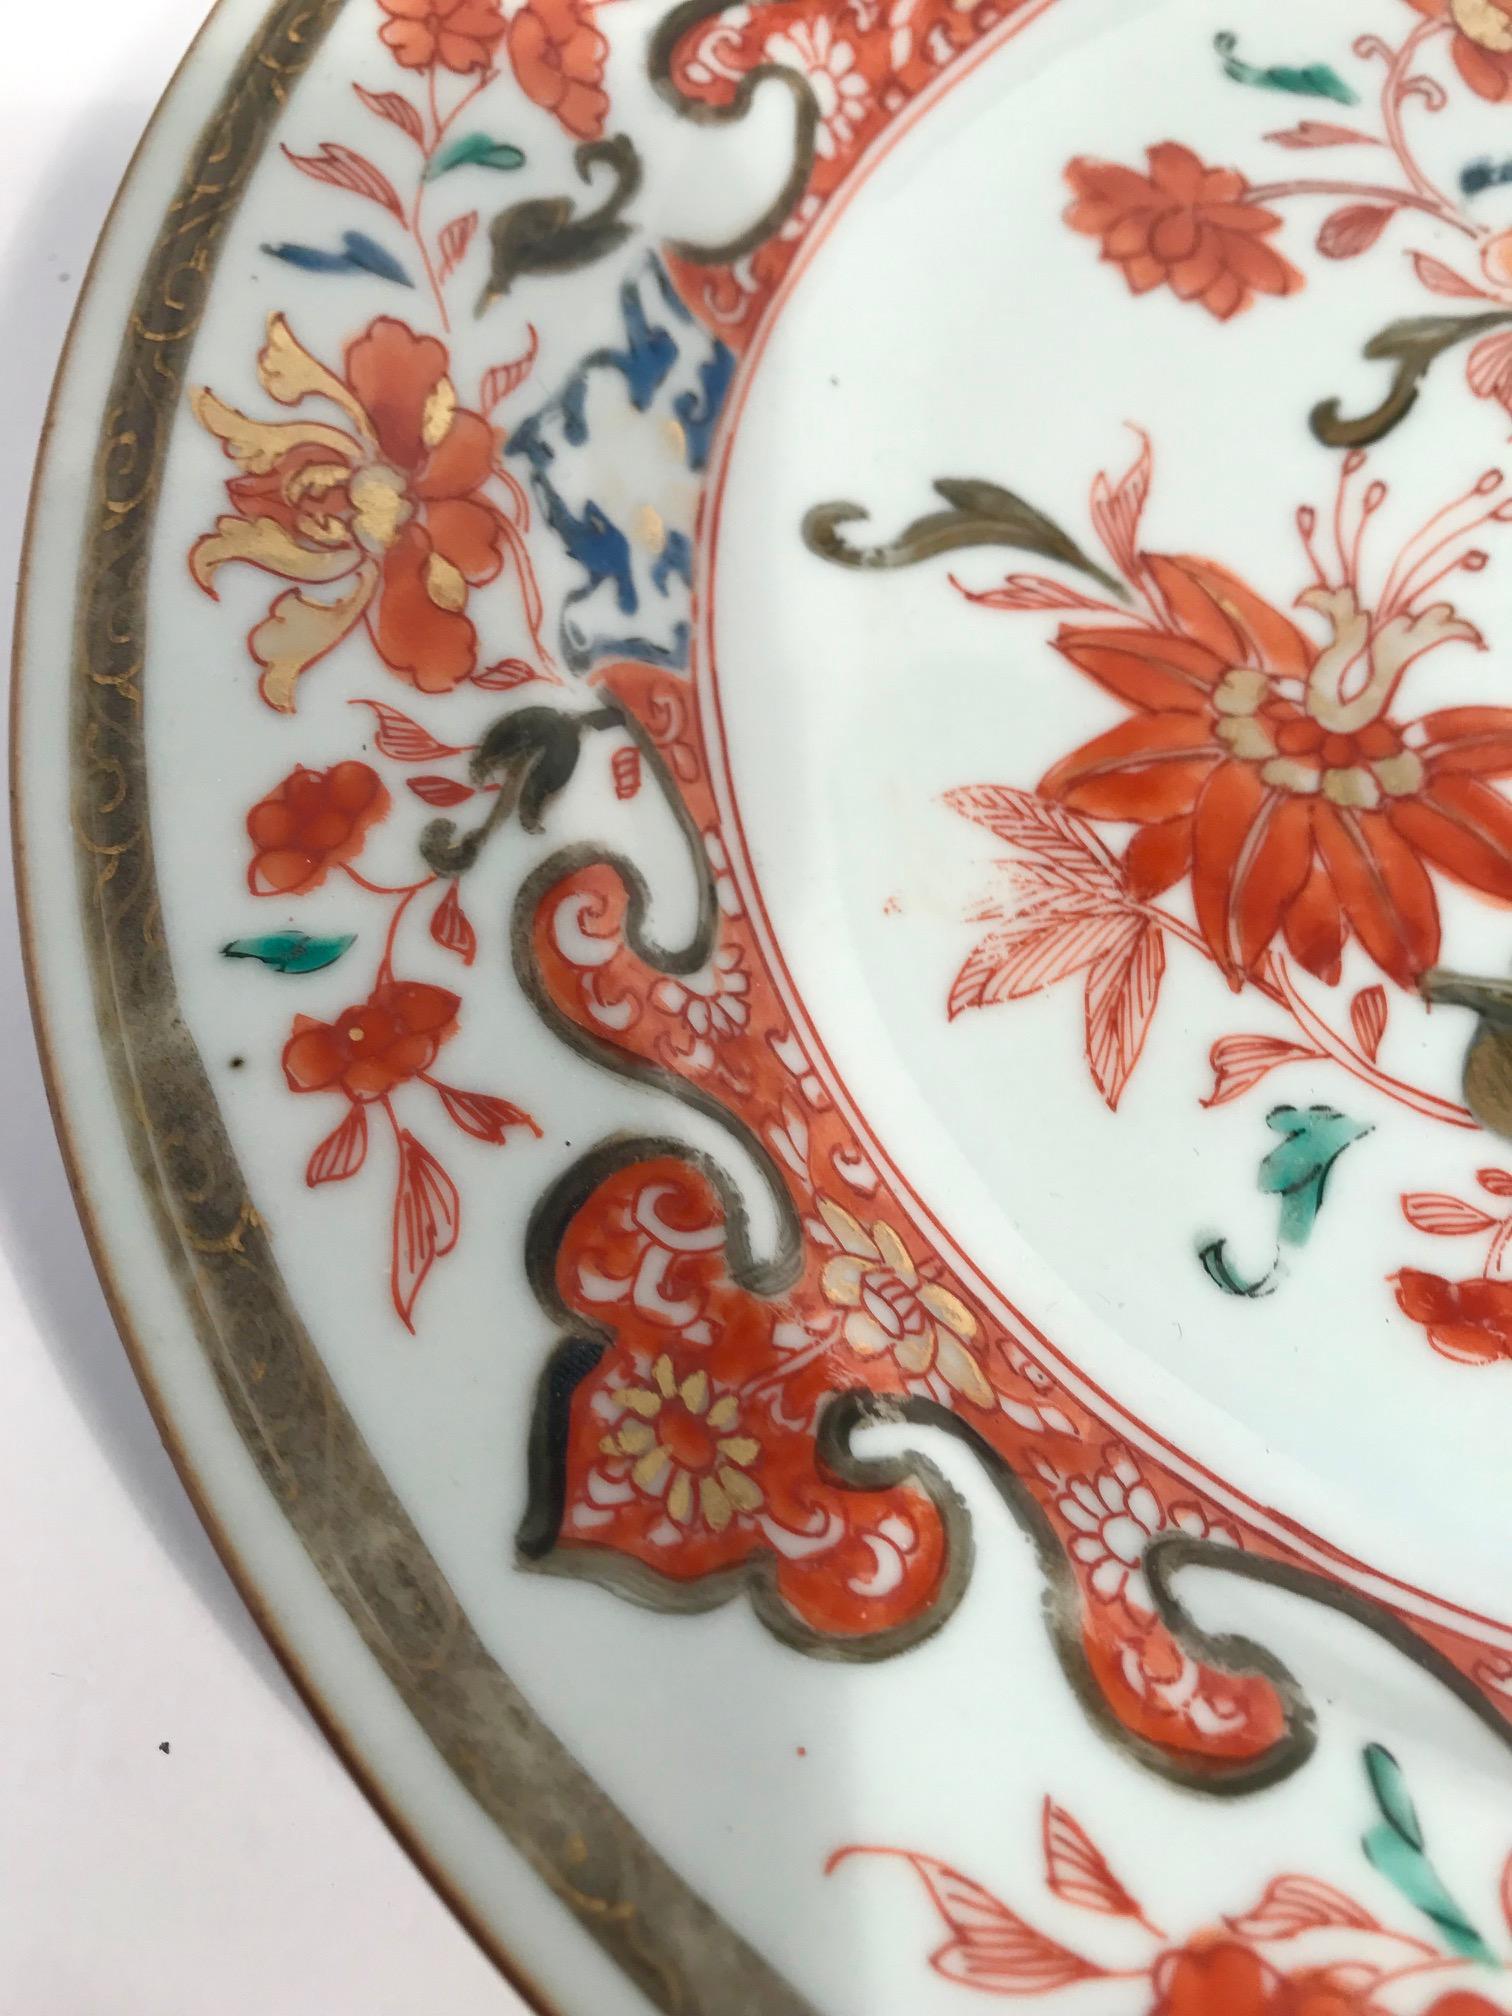 Chinese Export Export Porcelain Plate from the Elinor Gordon Collection